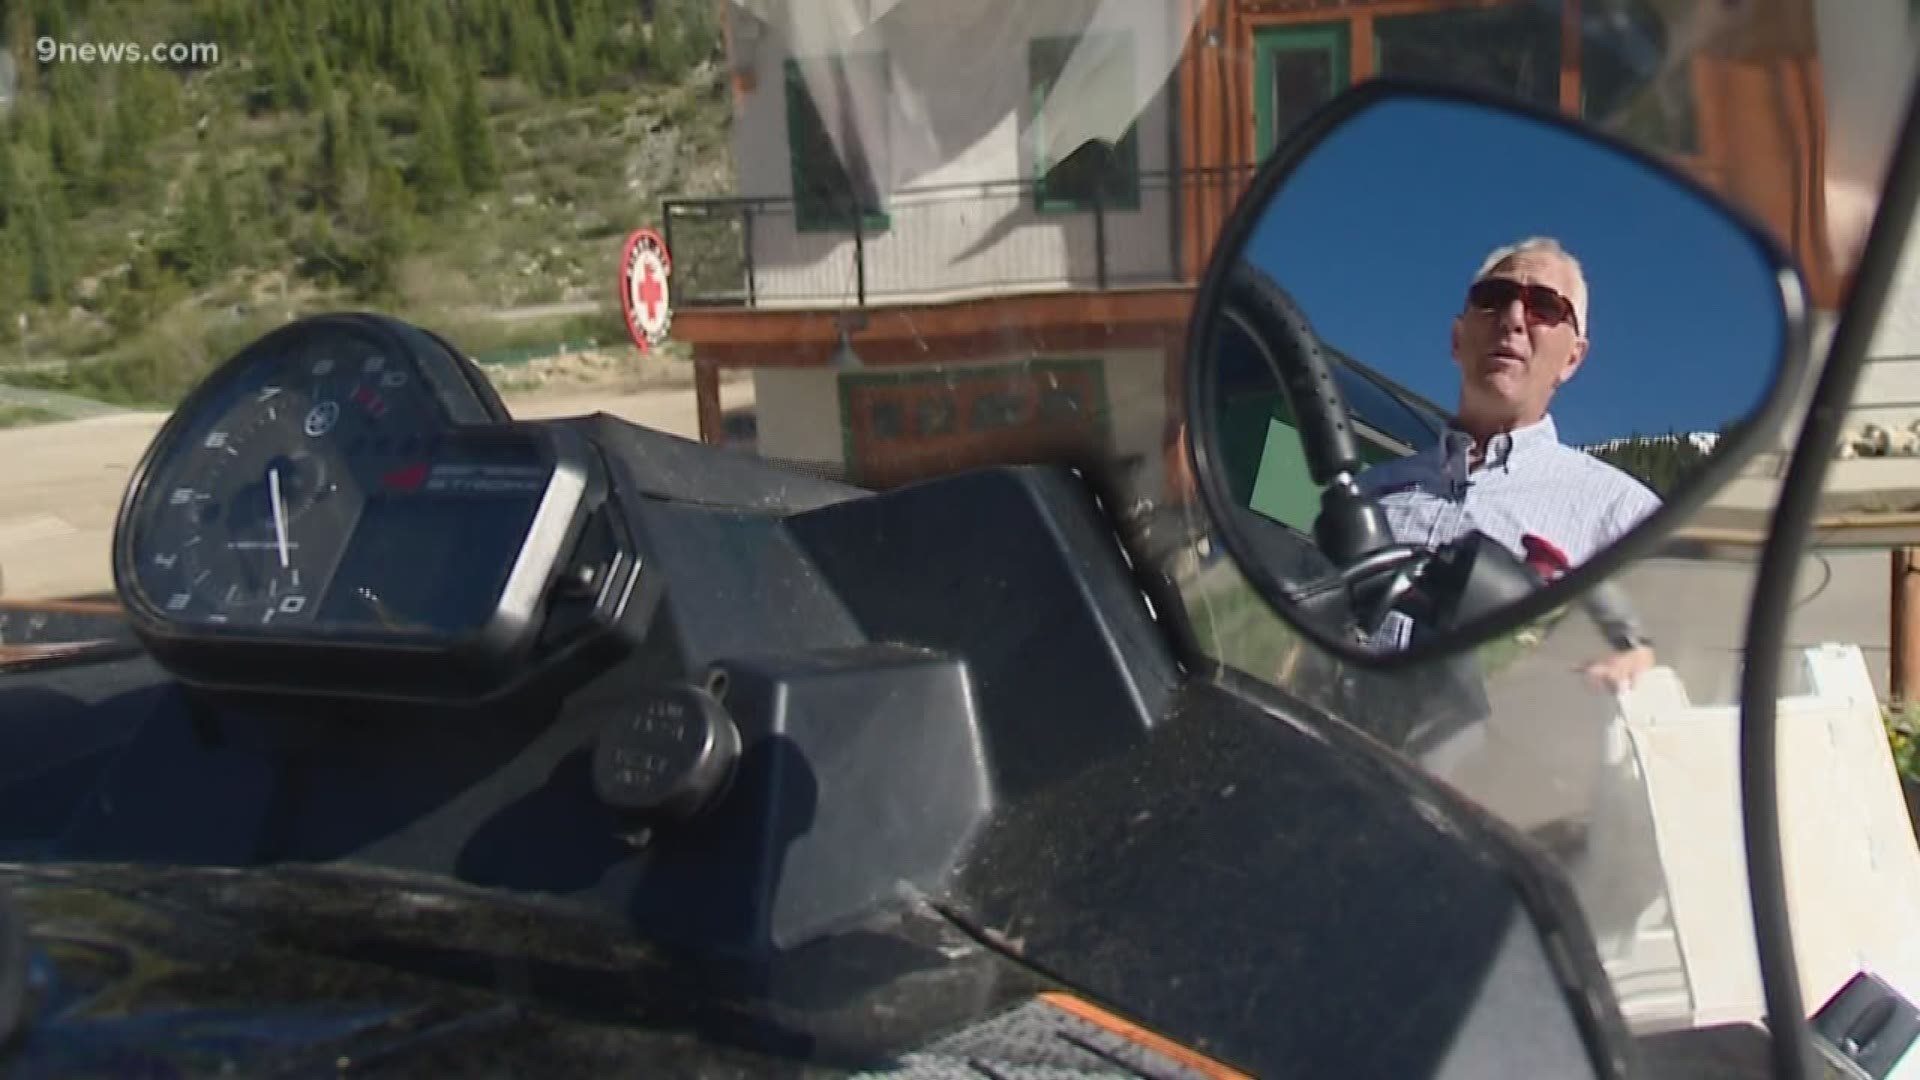 The 4th of July holiday will start off with a bang for skiers and snowboarders at Arapahoe Basin.